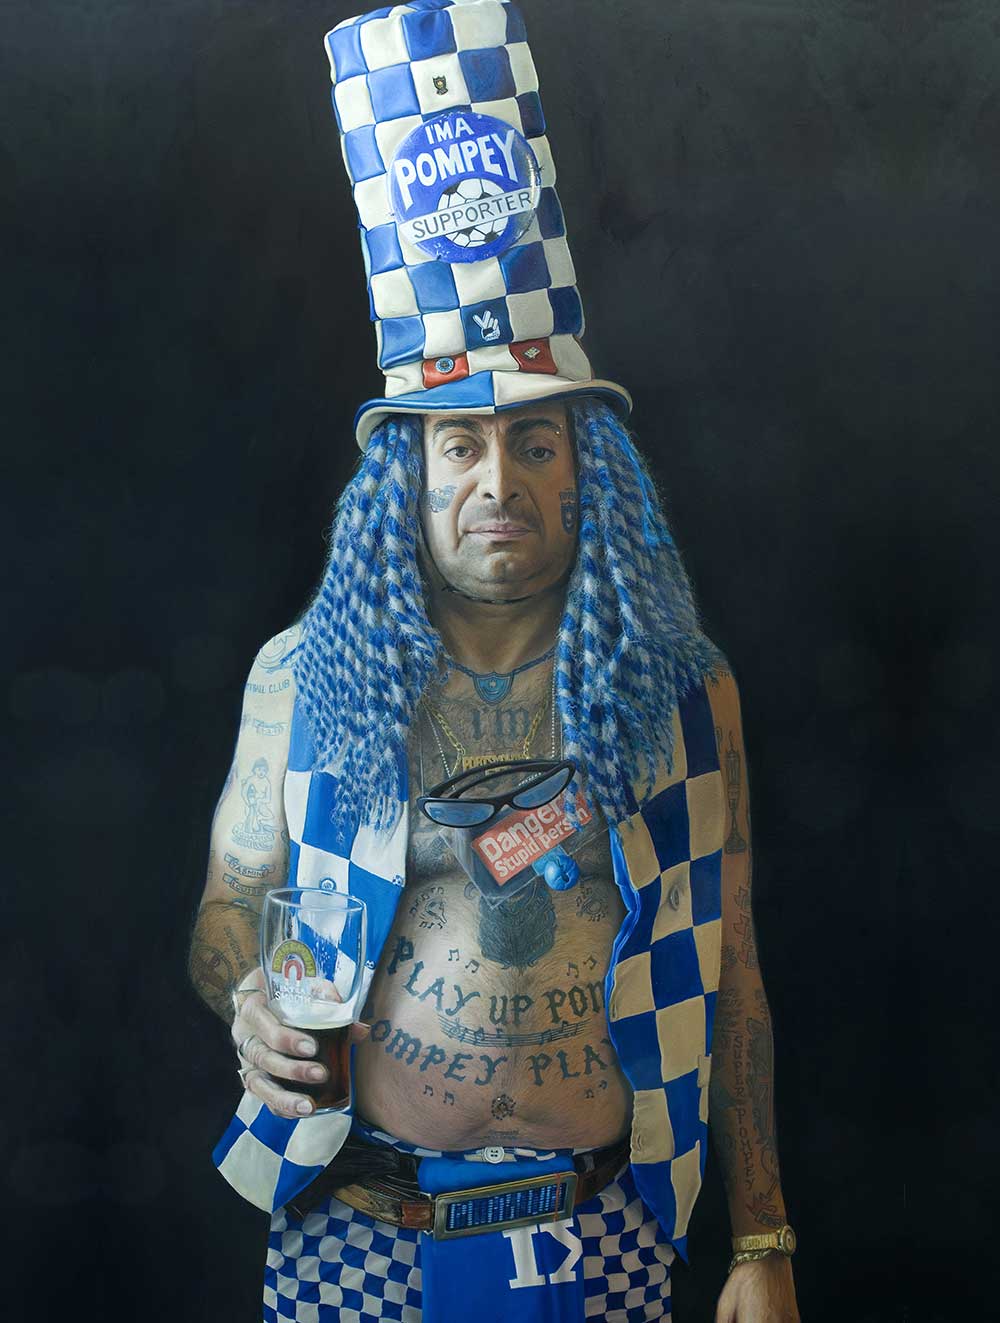 John Portsmouth Footbal Club Westwood: Oil on Canvas. Exhibited at the National Portrait Gallery, BP Awards 2009.